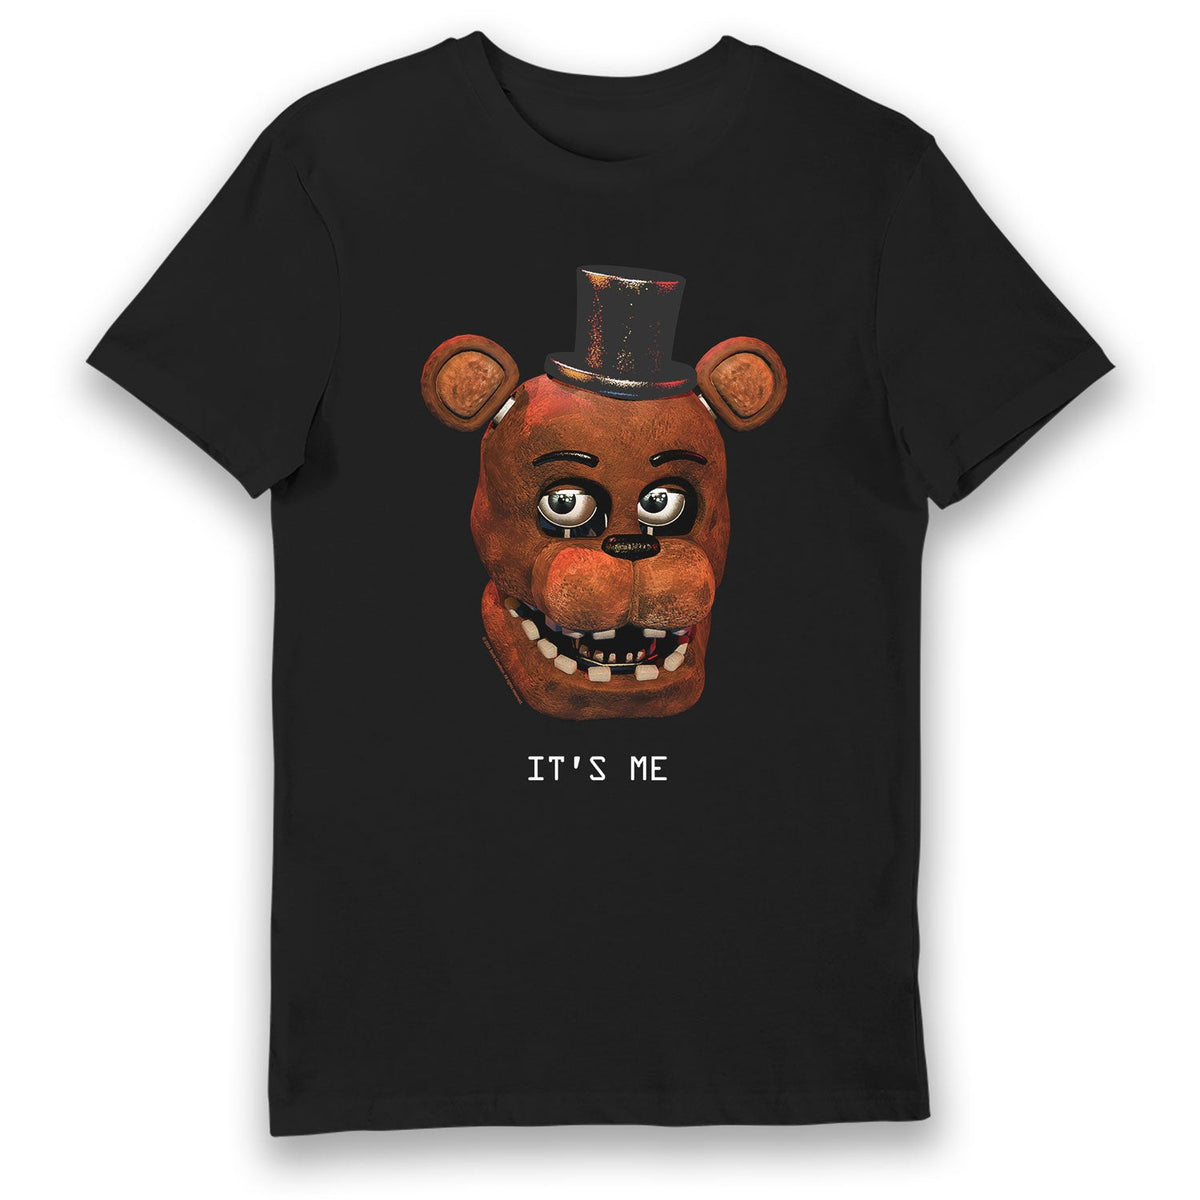 Five Nights At Freddys It's Me T-Shirt